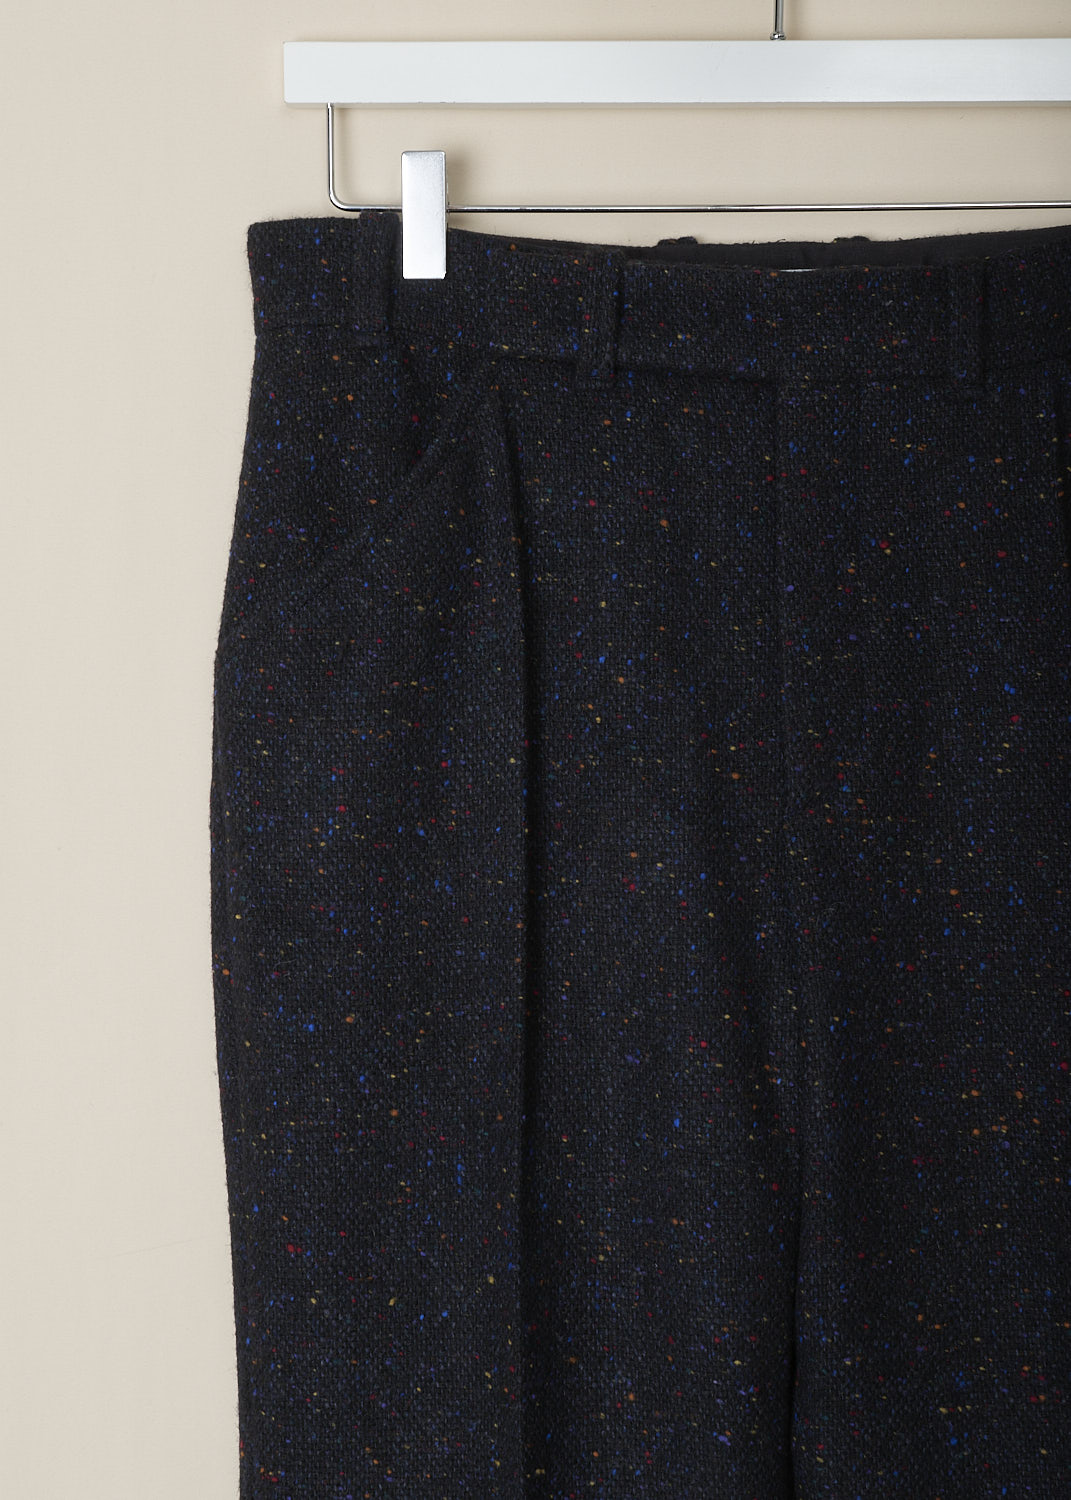 CHLOÃ‰, HIGH-WAISTED SPECKLED PANTS, CHC22APA141654D2_ANTHRACITE_BLUE, Blue, Grey, Print, Detail, This high-waisted pants have an anthracite blue base color with multicolored speckles throughout. These pants have a narrow waistband with belt loops and a concealed zip closure. These pants have slanted pocket sin the front and welt pockets in the back. The flared pant legs have centre creases along the front and back. 
